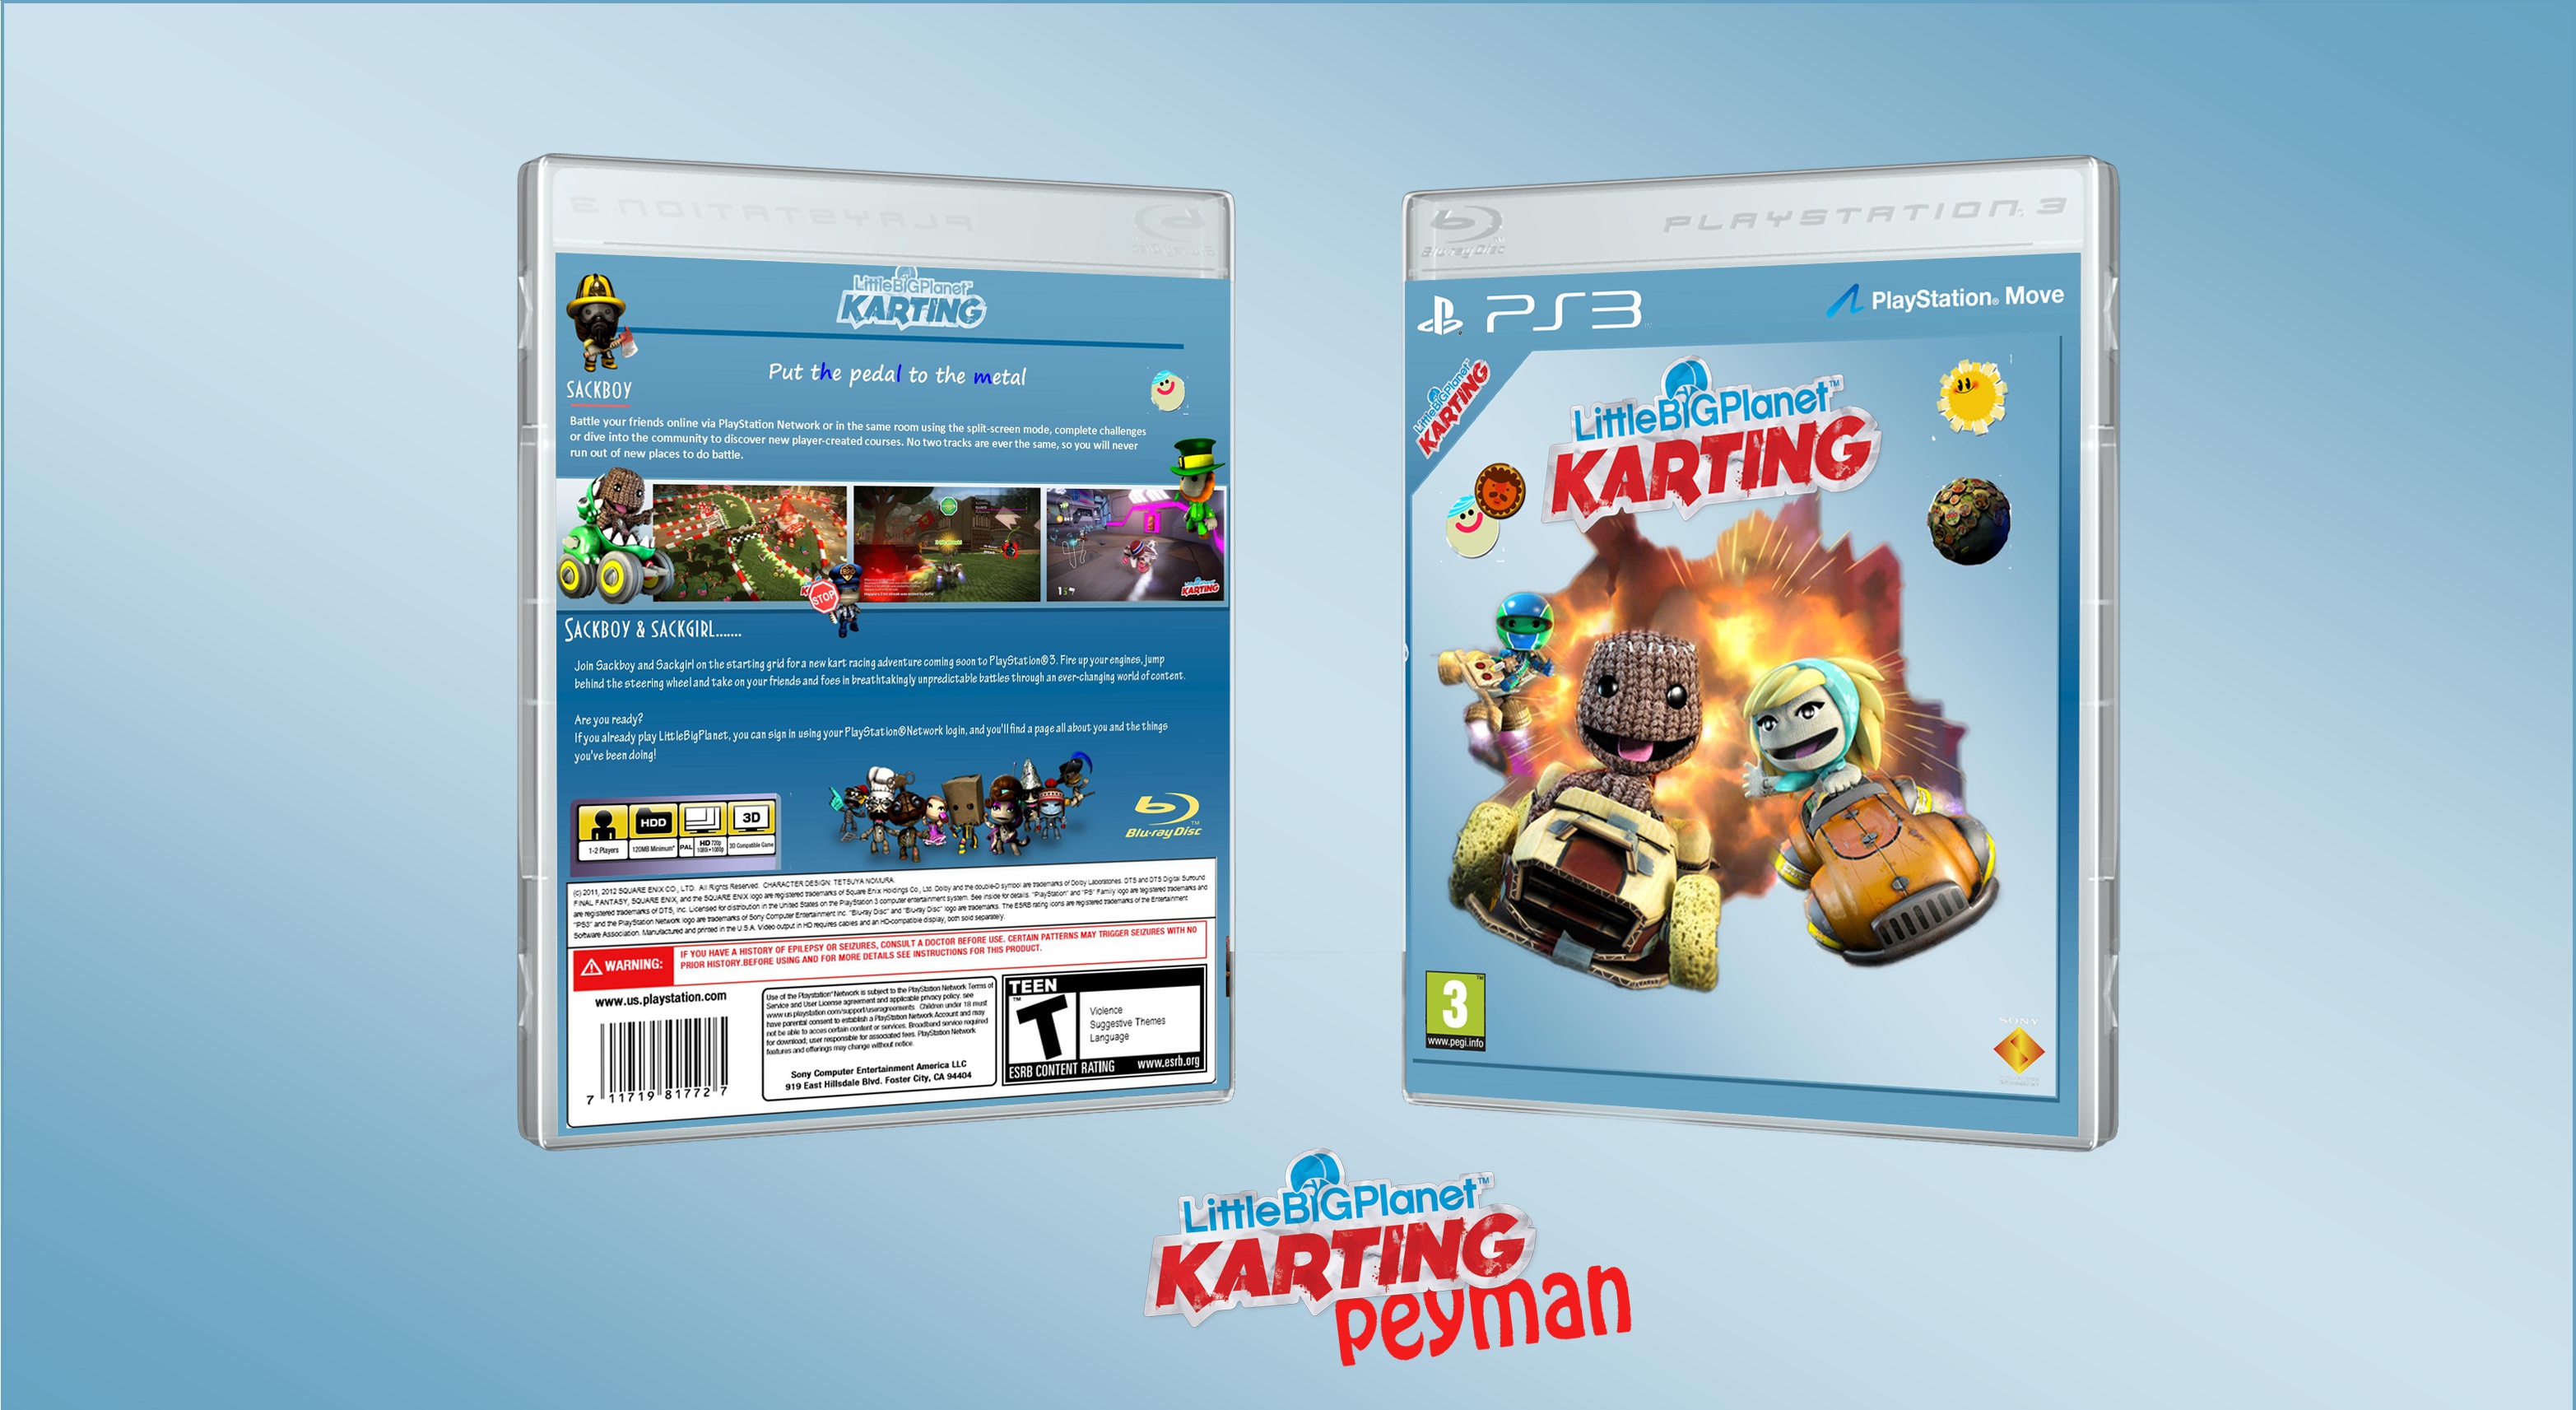 little big planet karting box cover